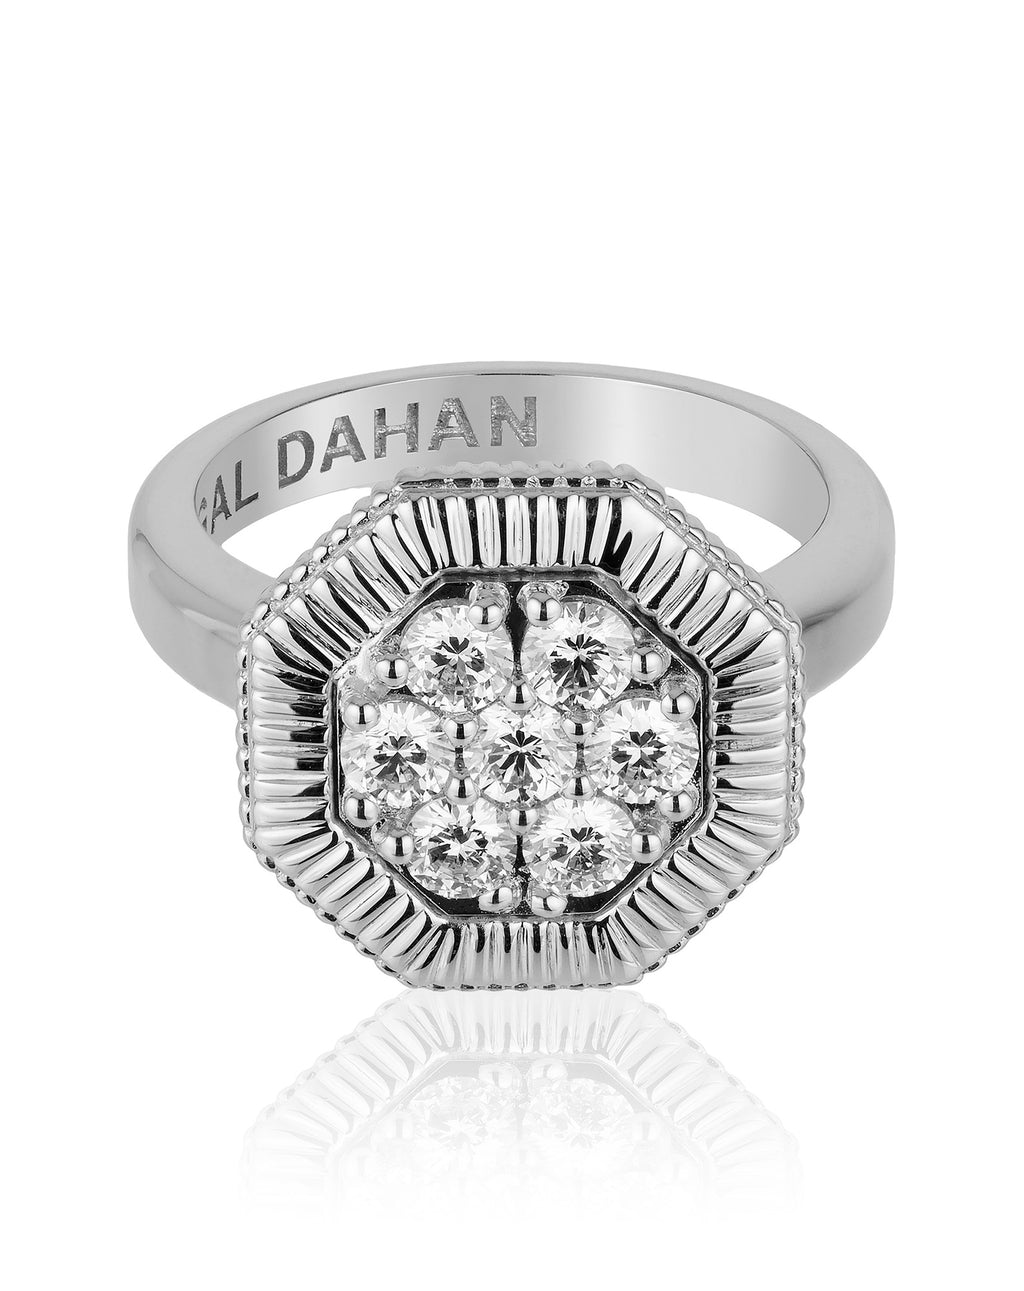 Octanight Ring in White Gold